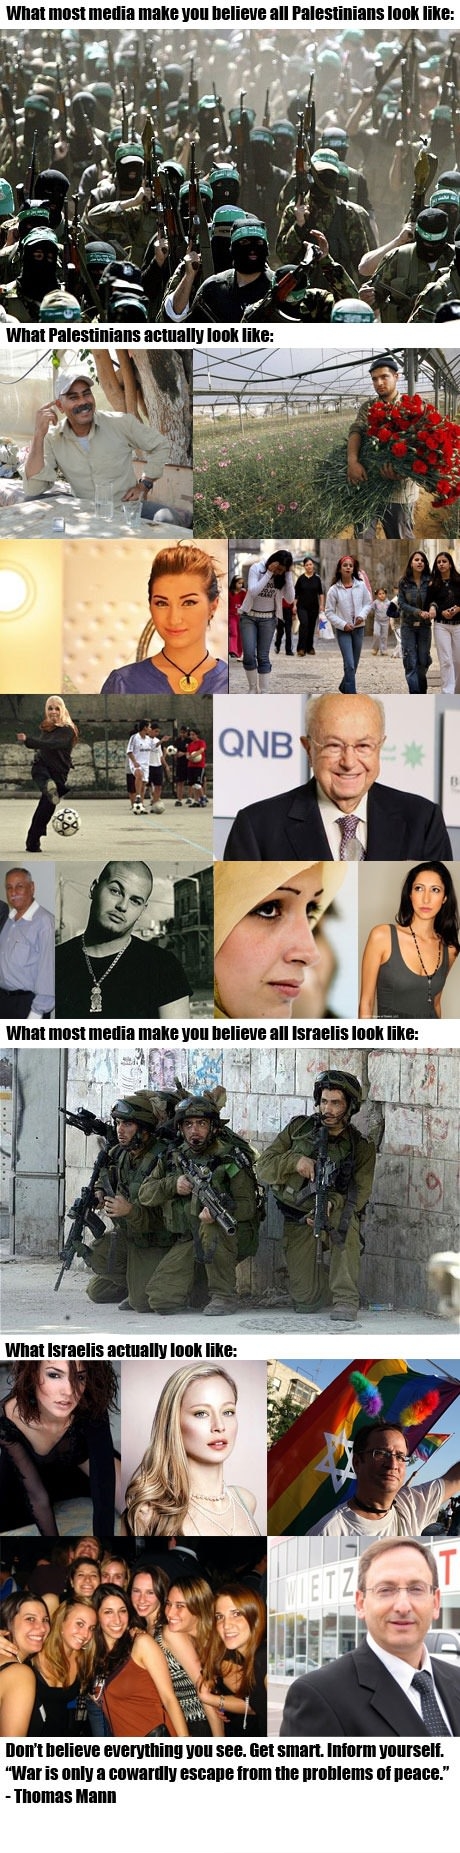 How the media show us Palestinians and Israelis